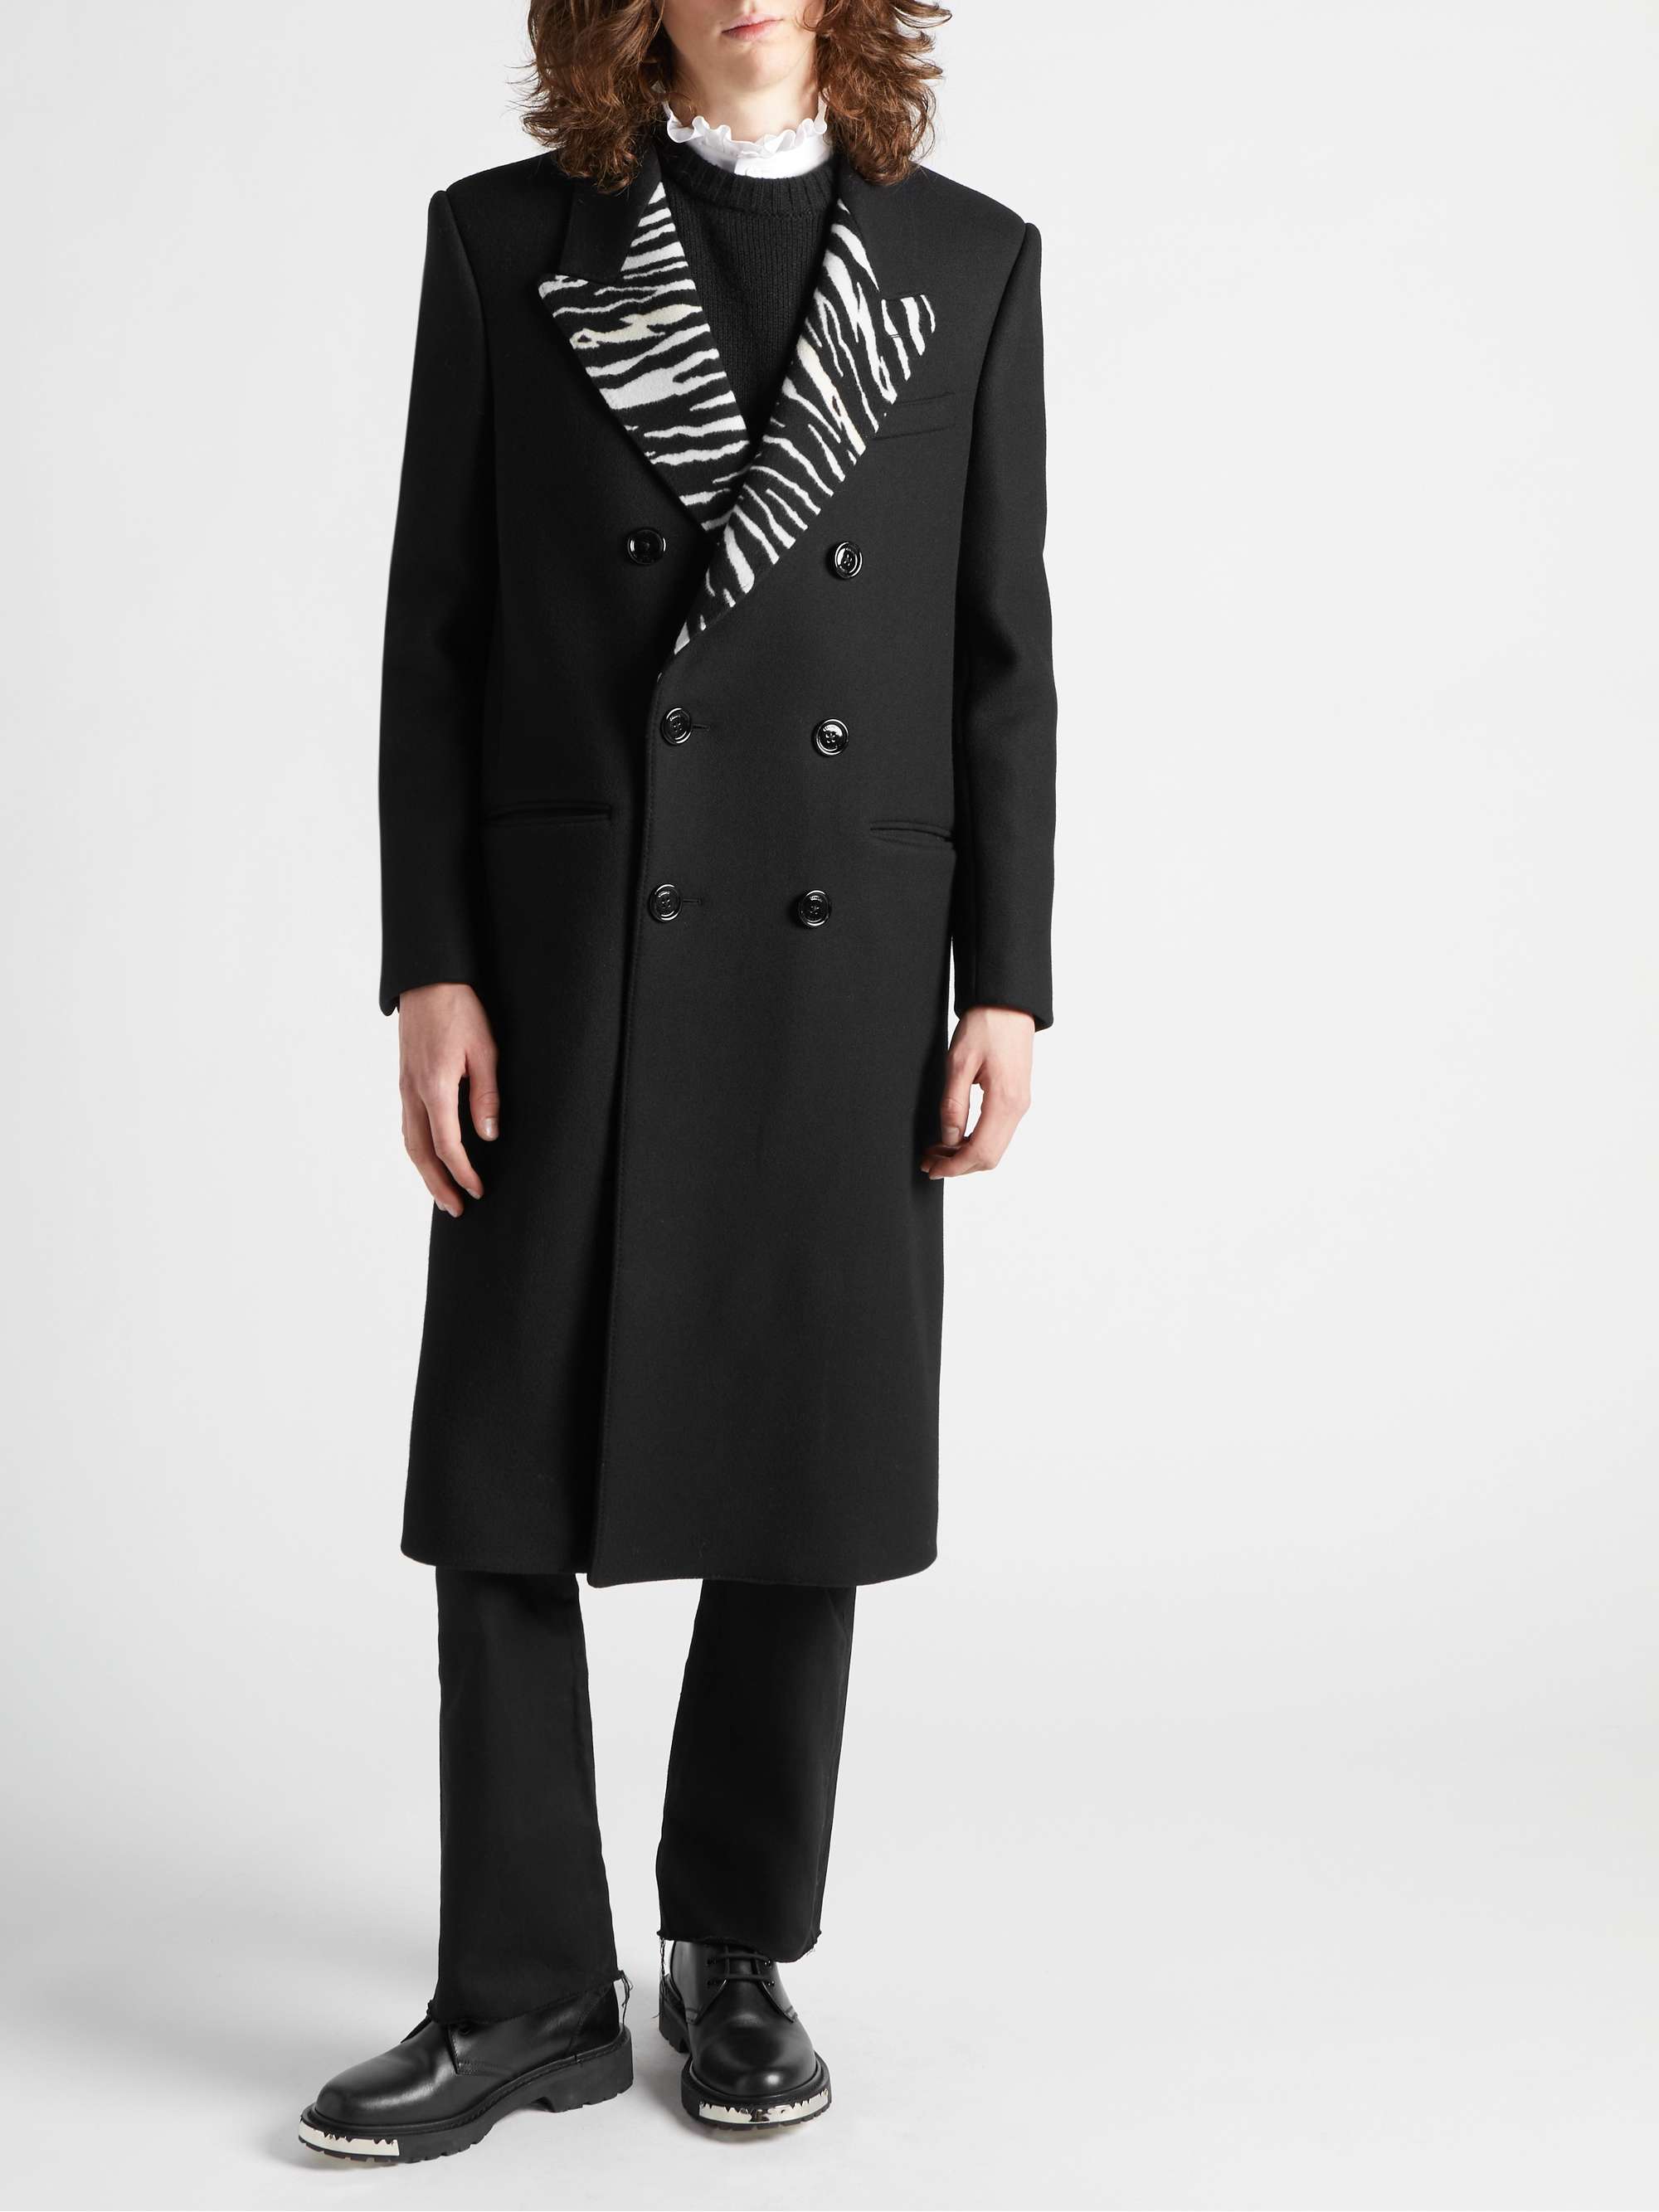 CELINE HOMME Double-Breasted Wool-Blend Overcoat